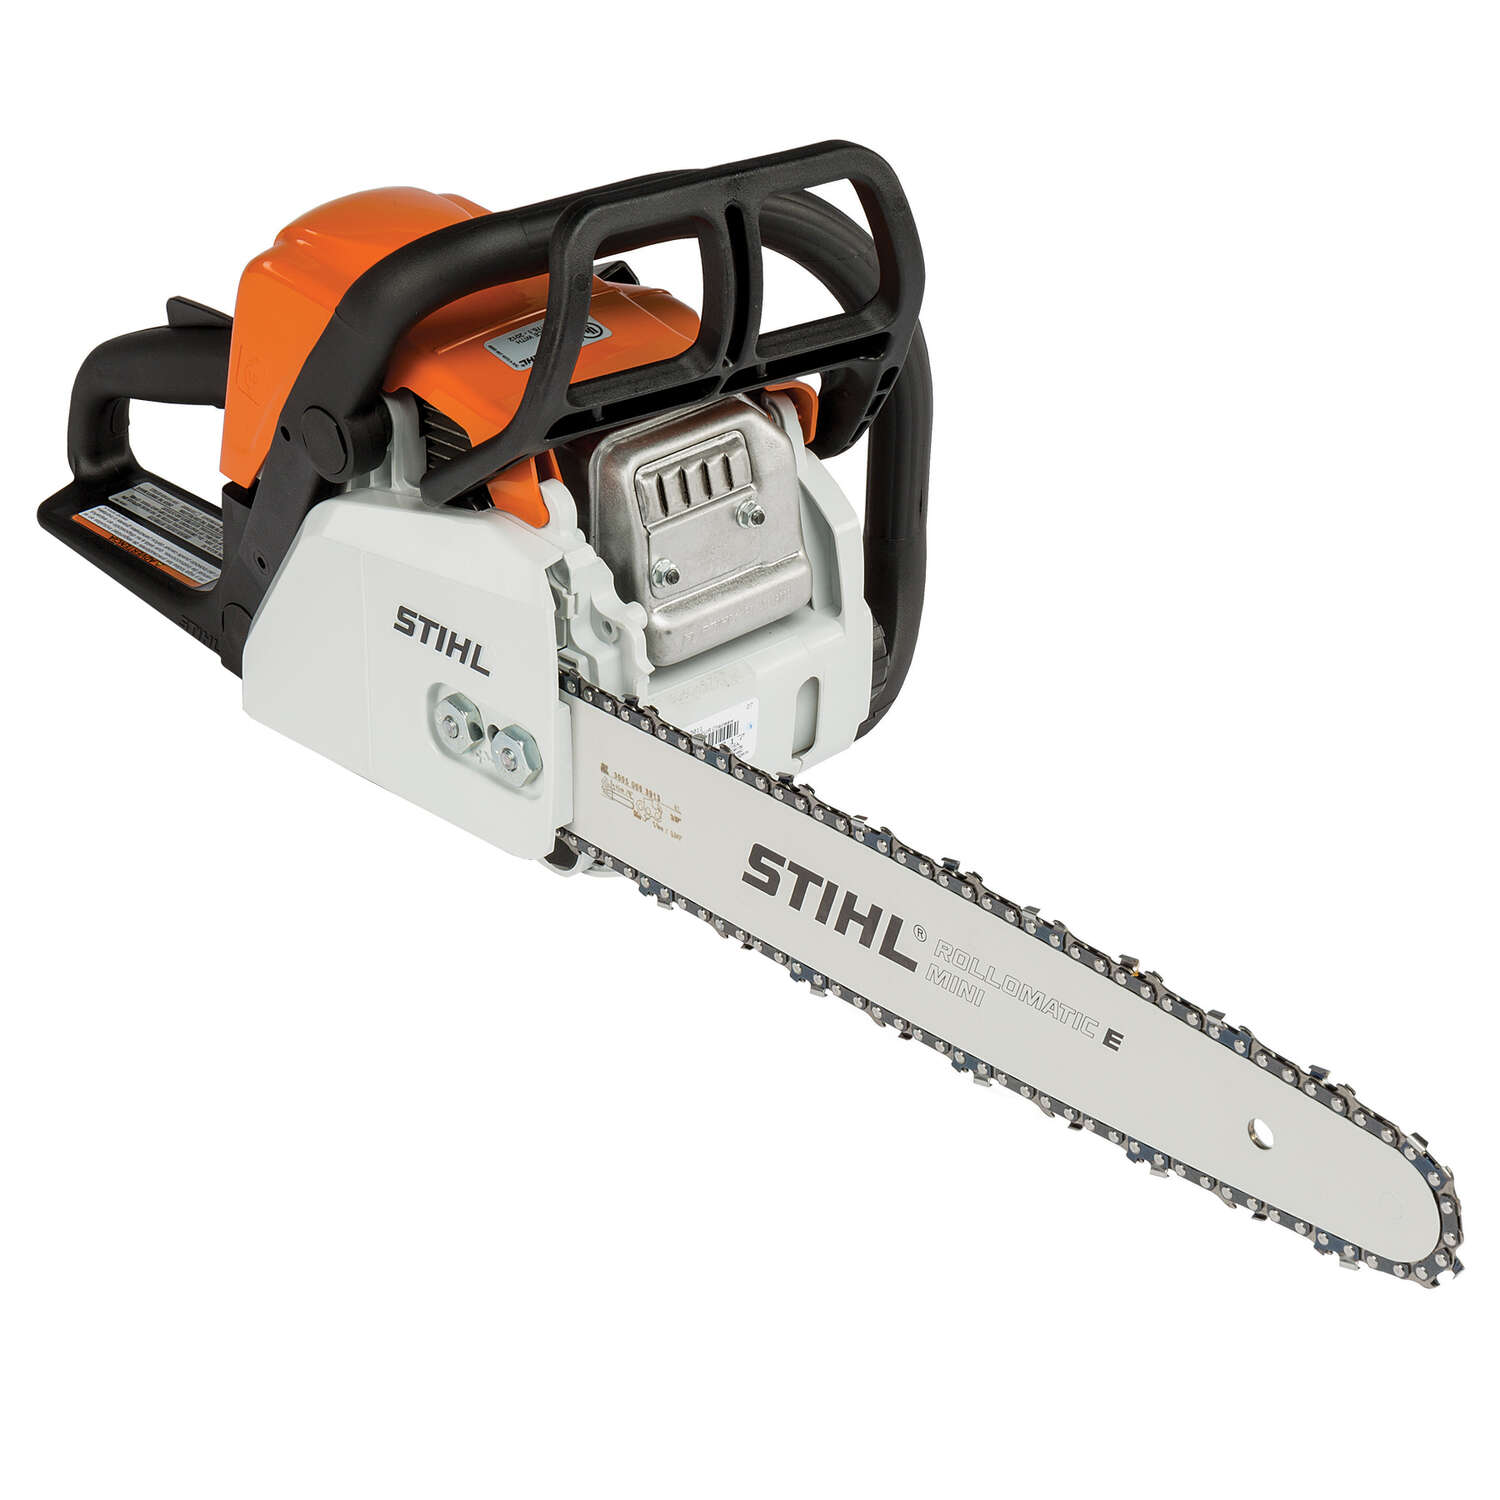 Departments - STIHL MS 180 16 in. 31.8 cc Gas Chainsaw